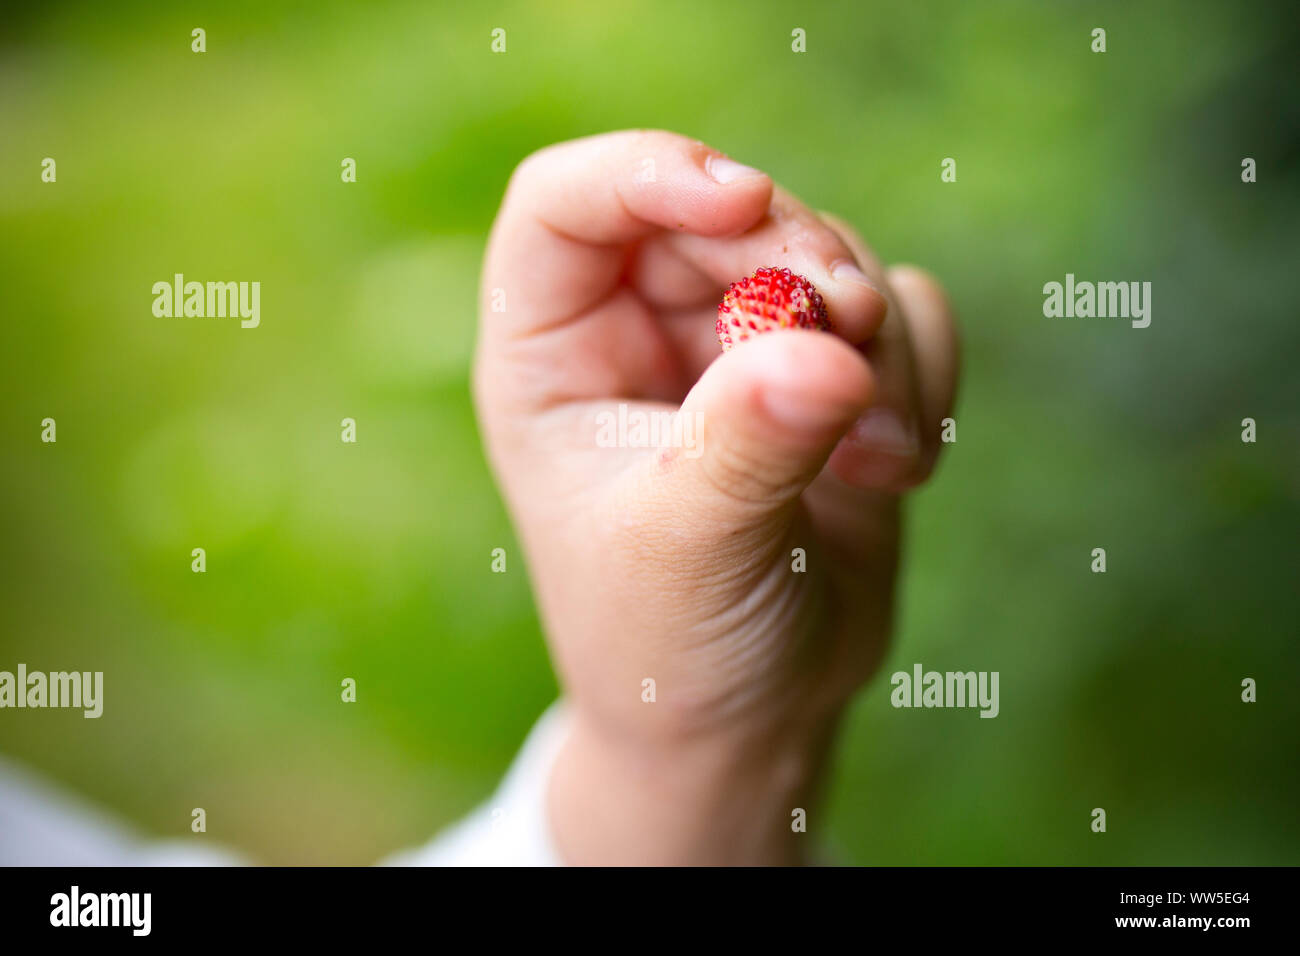 Children's hand with little strawberry in front of green background Stock Photo